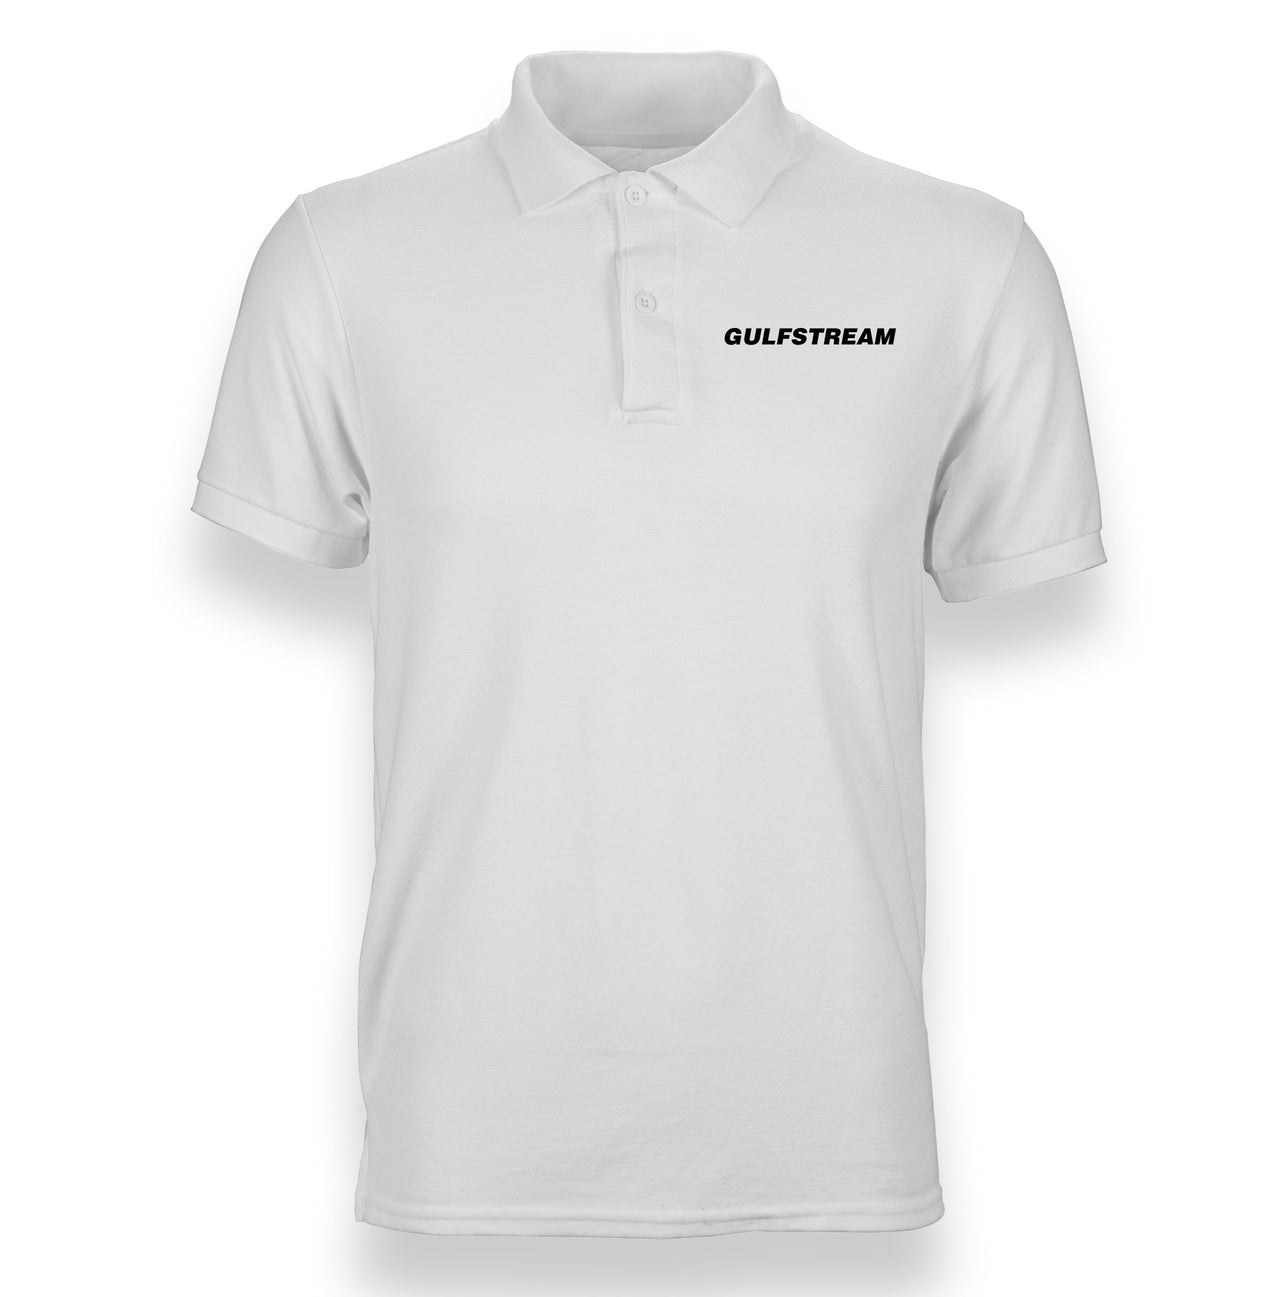 Gulfstream & Text Designed Polo T-Shirts